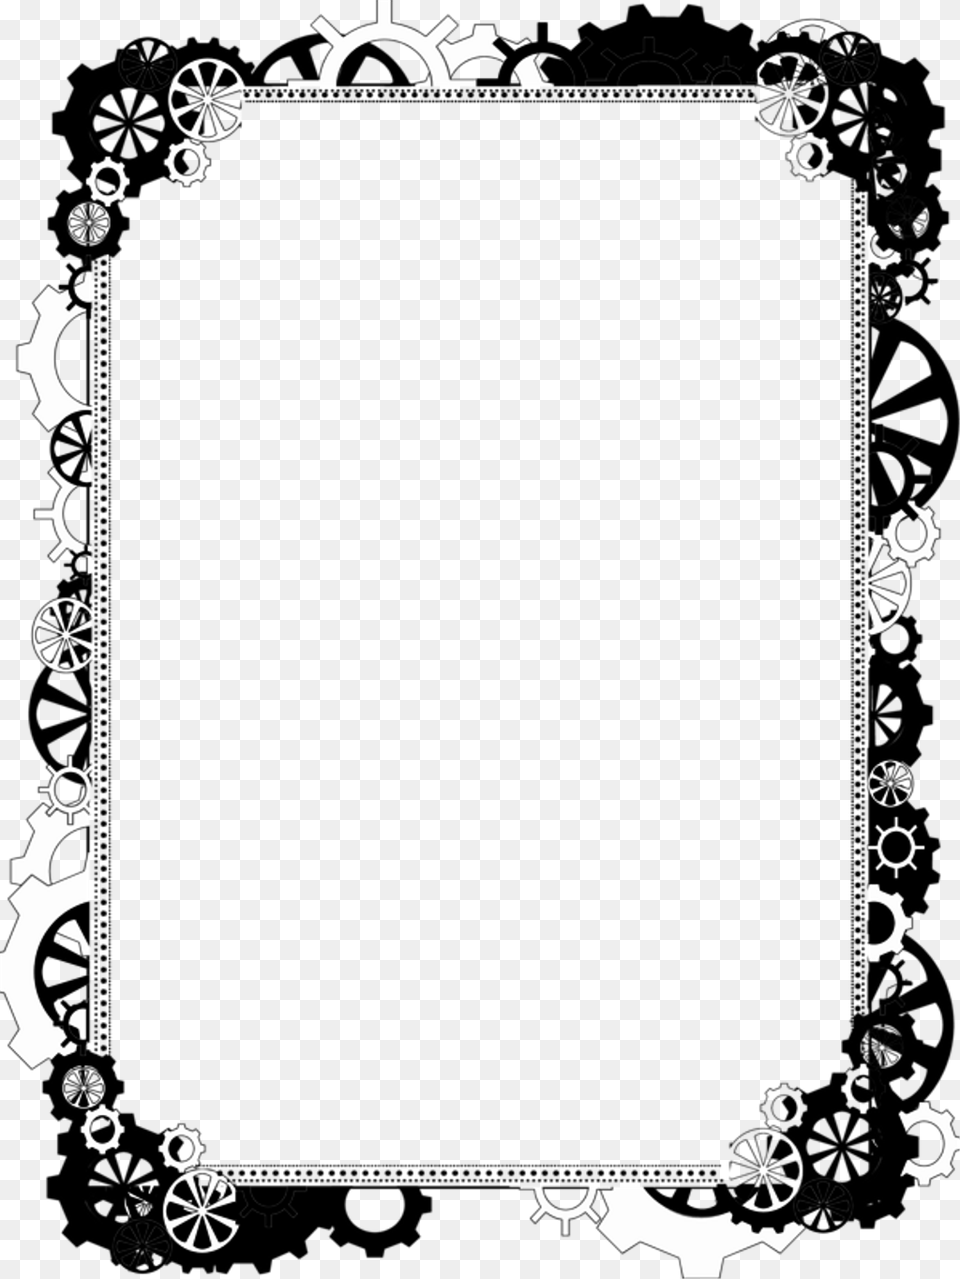 Report Abuse Steampunk Frame Free Transparent Png